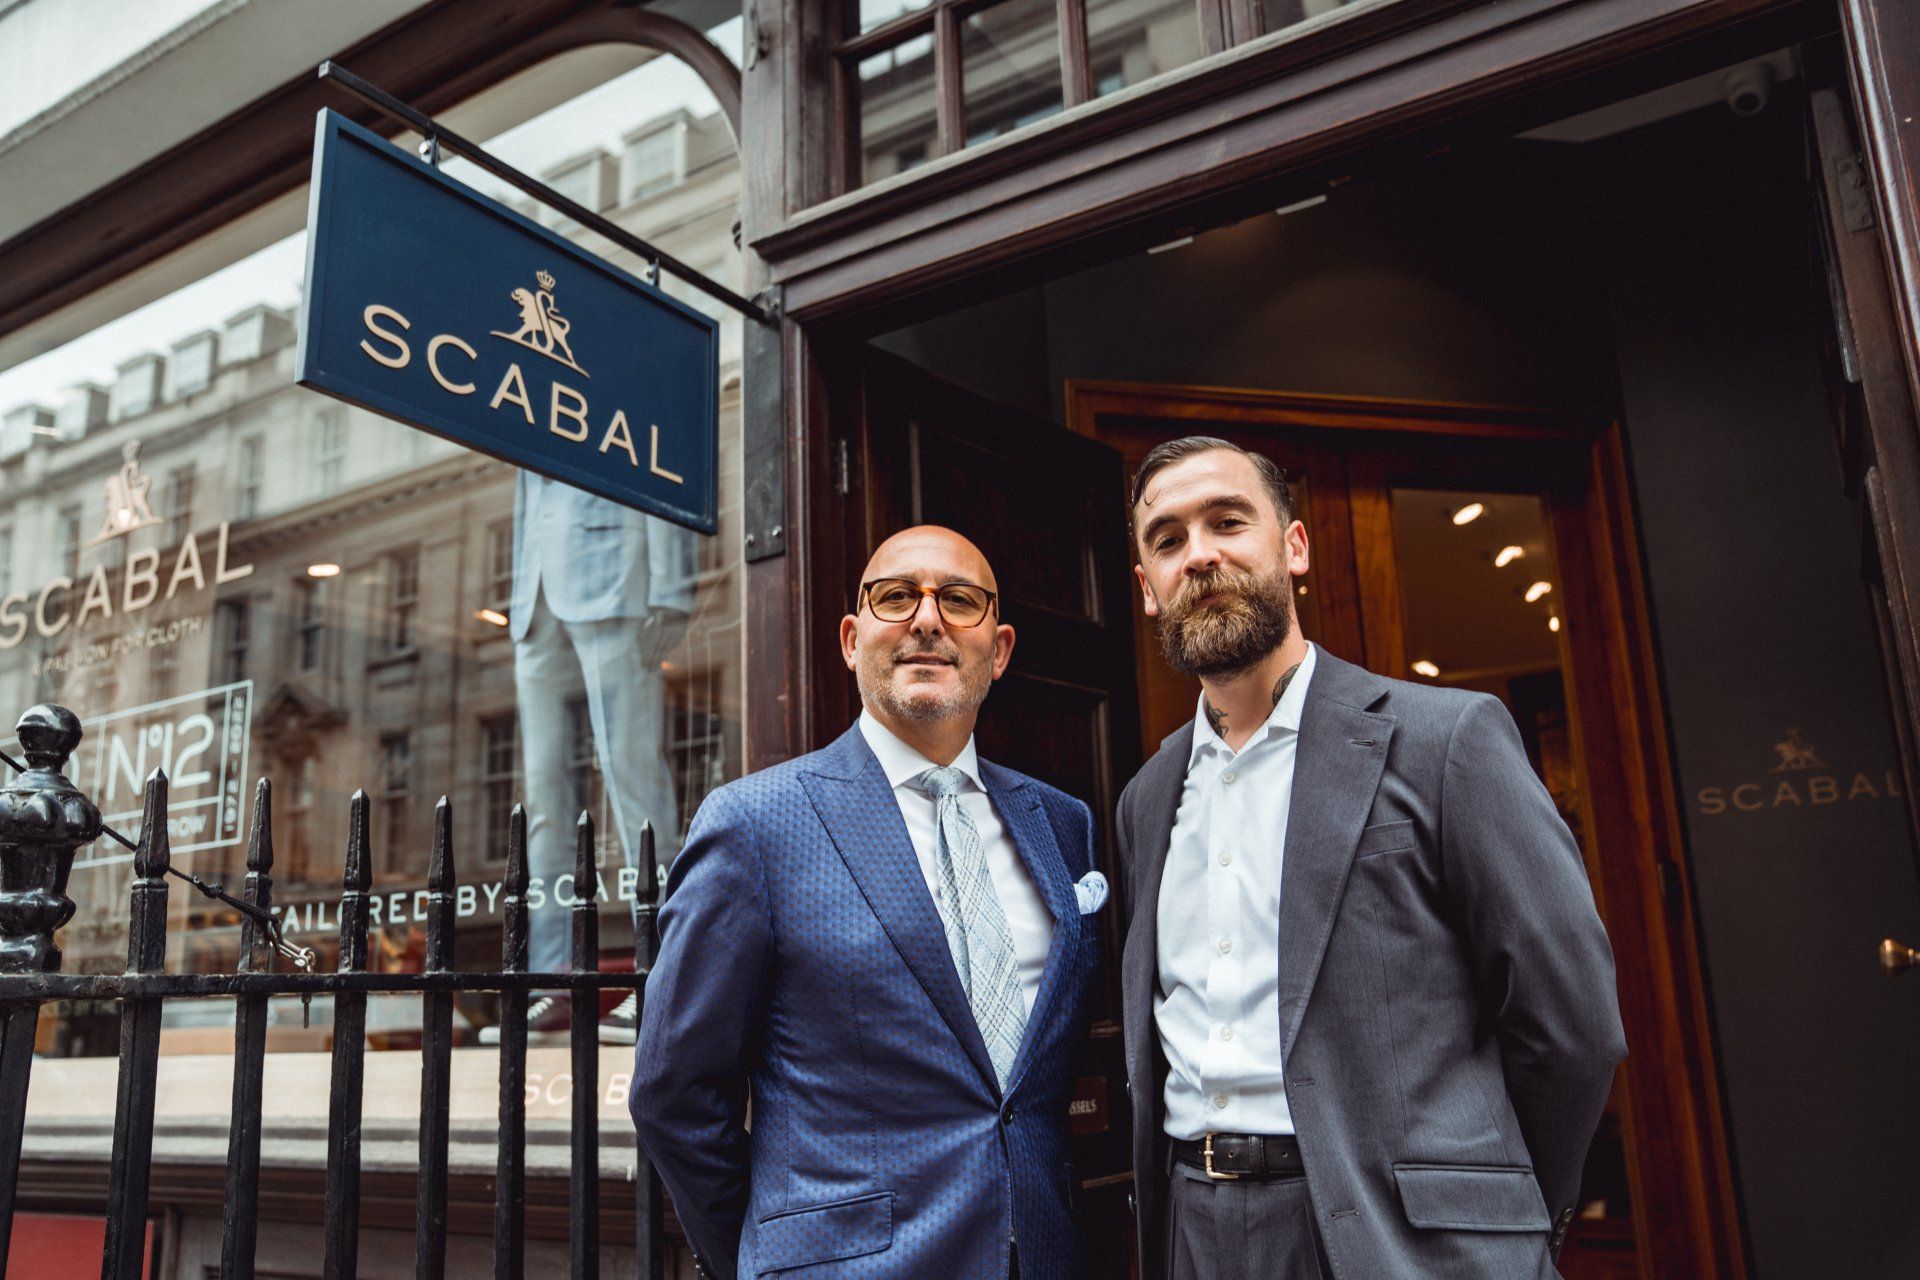 Adam James Bespoke - working hand-in-hand with Scabal